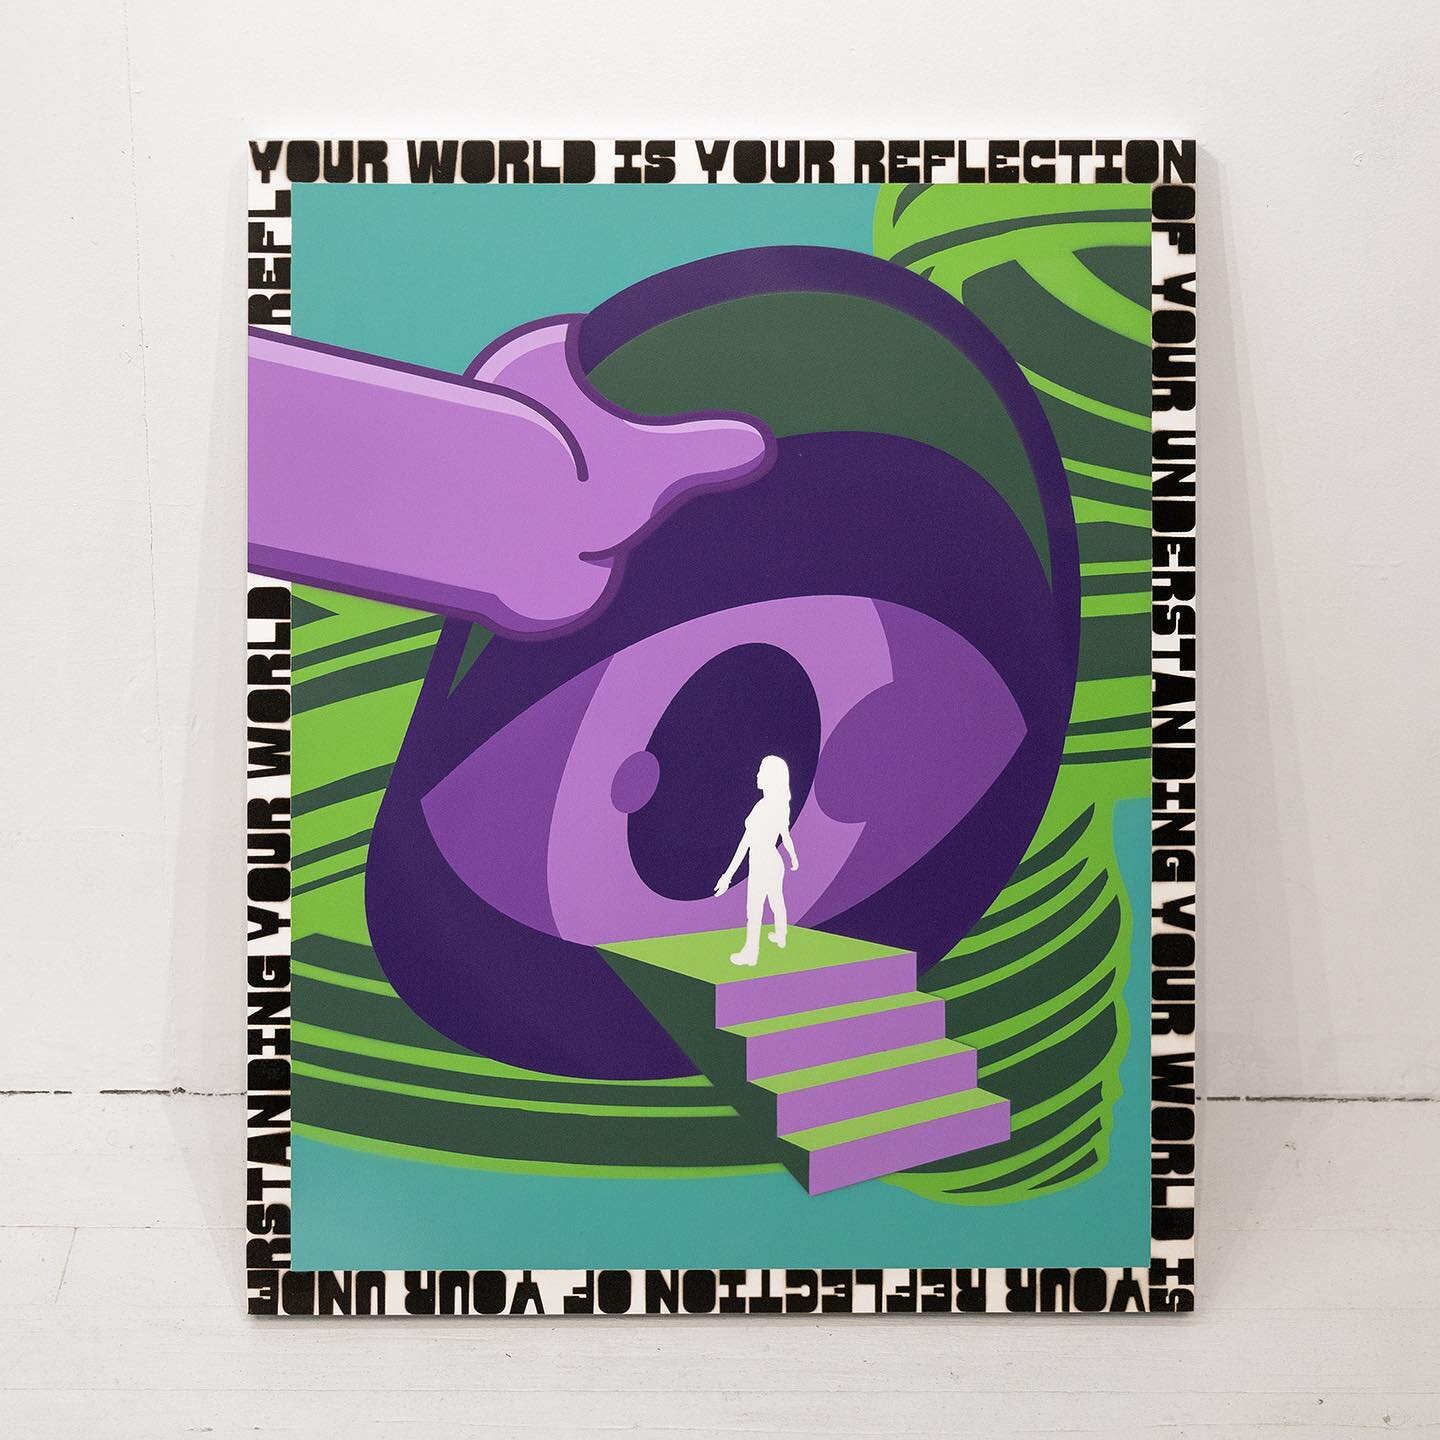 &lsquo;Your World&rsquo; - Original Painting

-18 Layer Stencil and Spray paint on Custom Wood Panel 
-24&rdquo; x 30&rdquo; x 2.5&rdquo; (61cm x 76.2 cm x 6.3cm) 
-signed on back